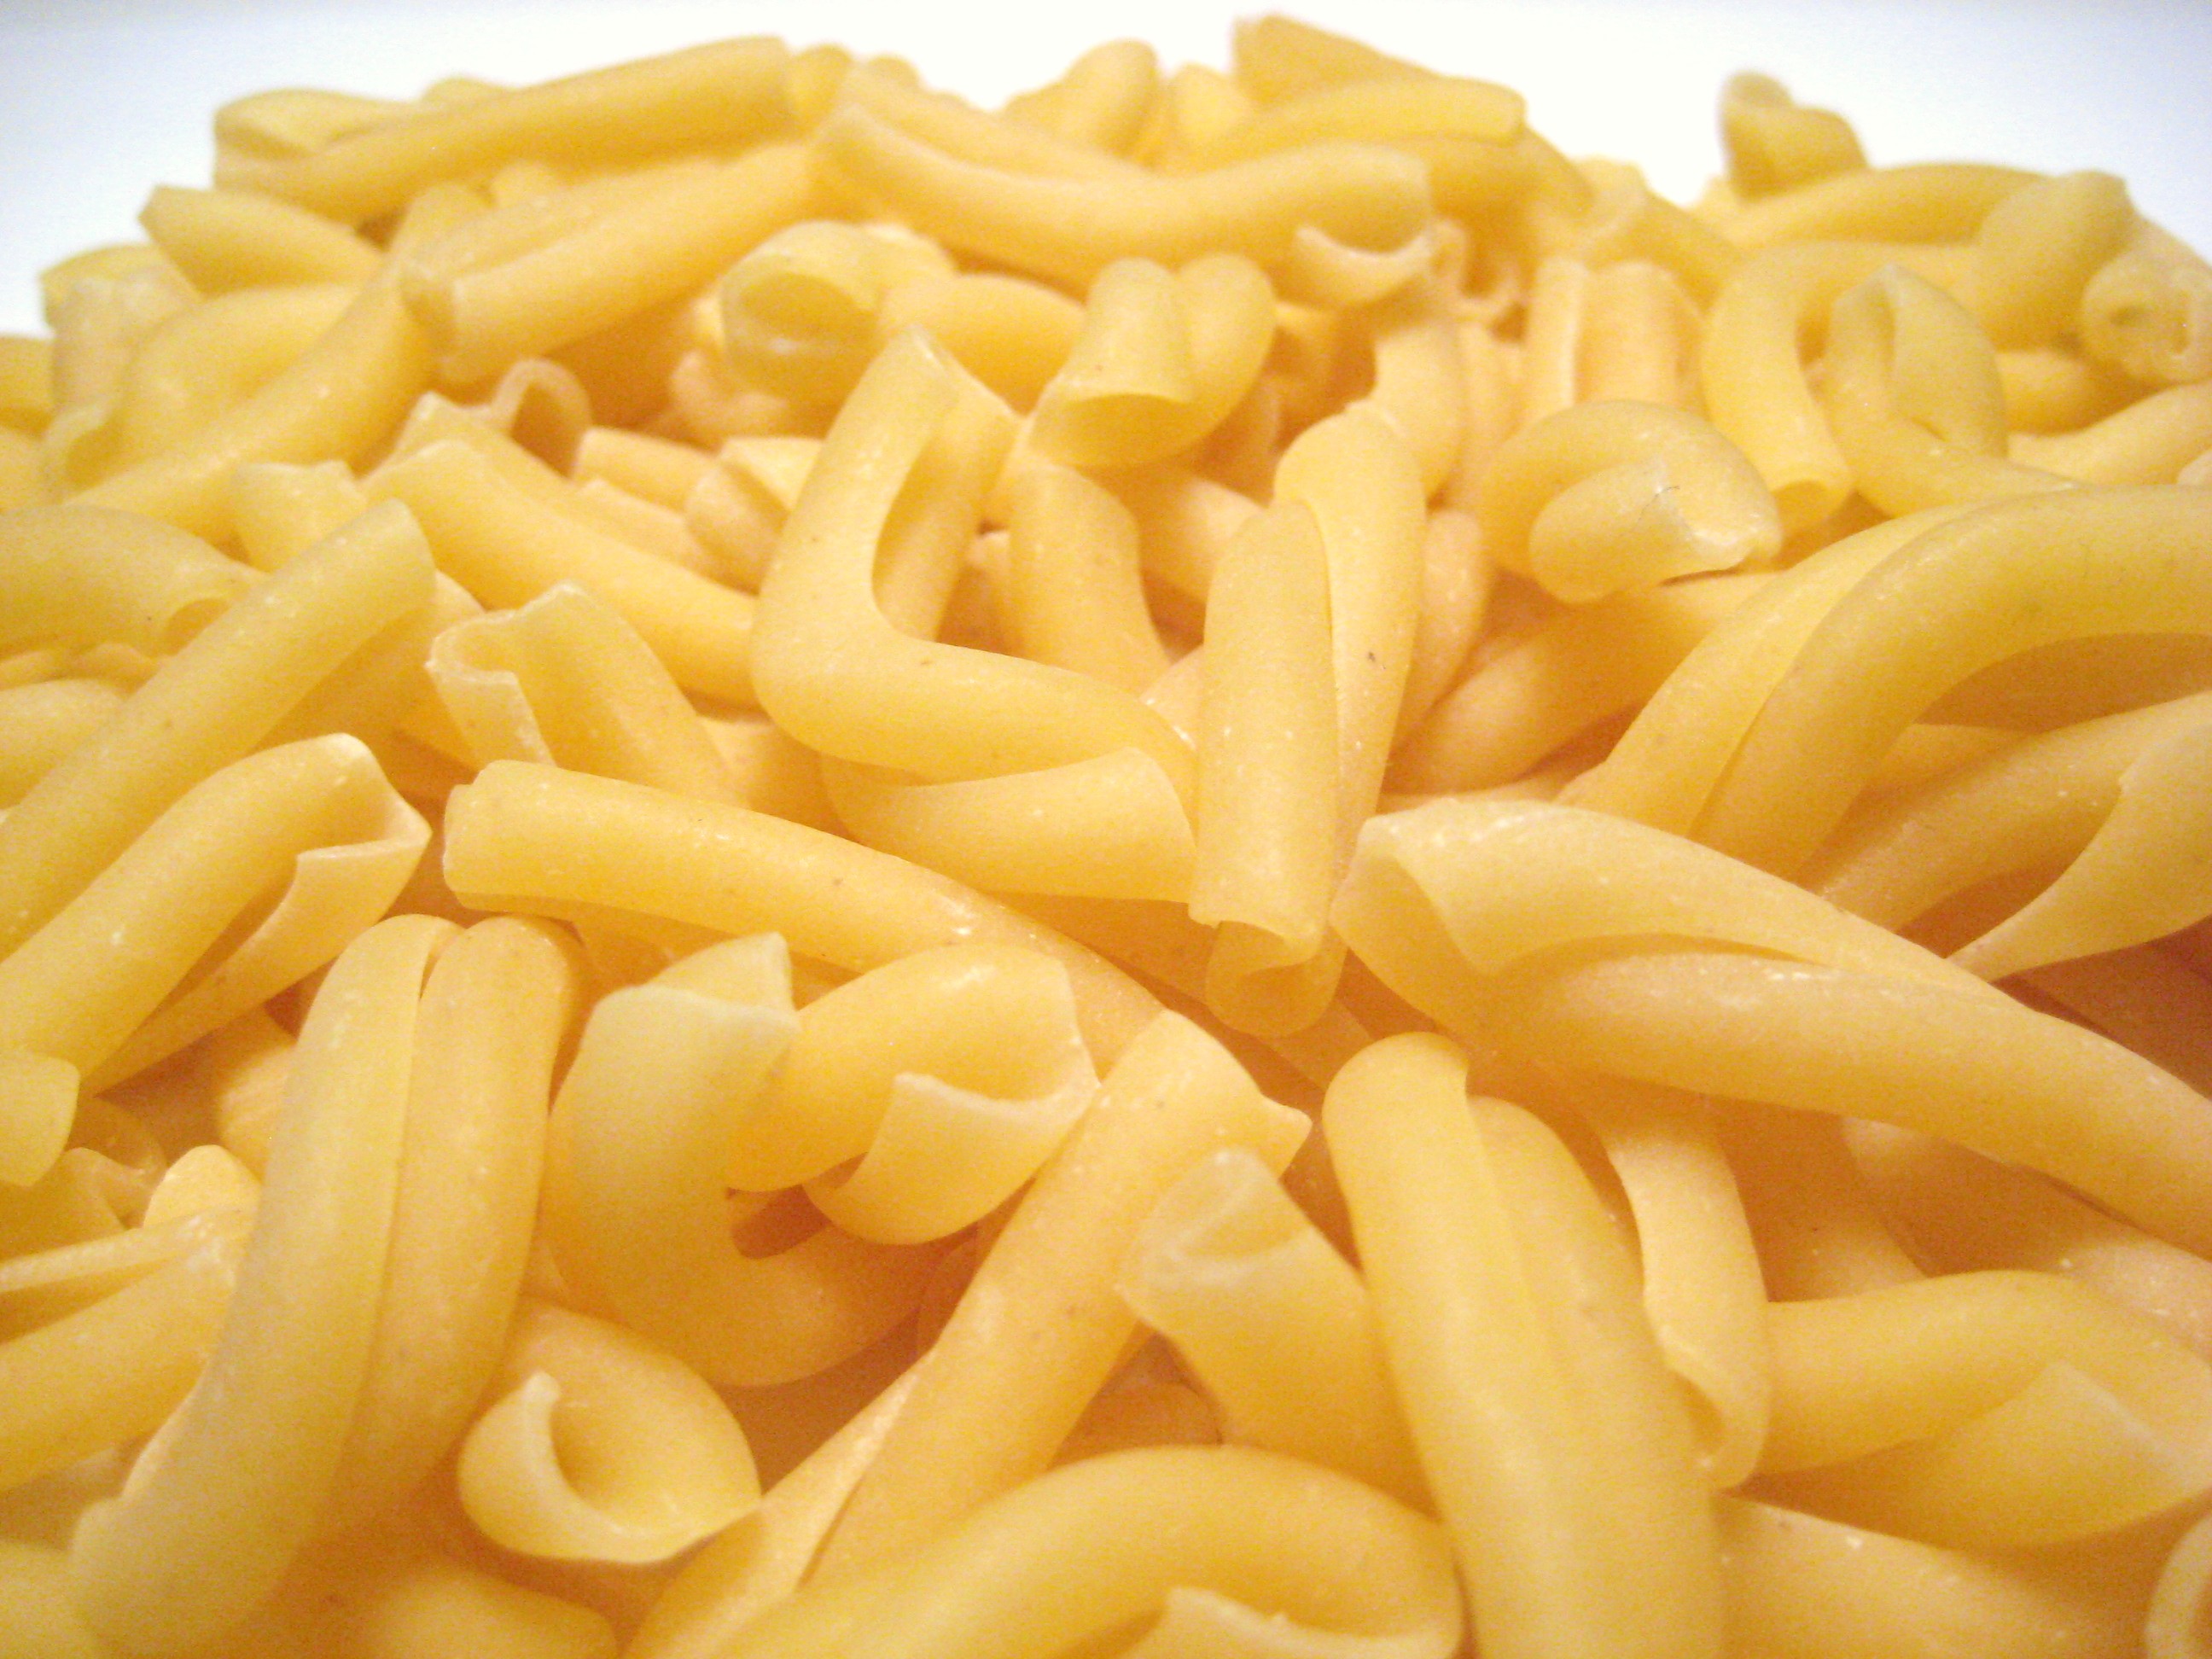 Pasta Types - Shapes, Names of Different Types of Pasta